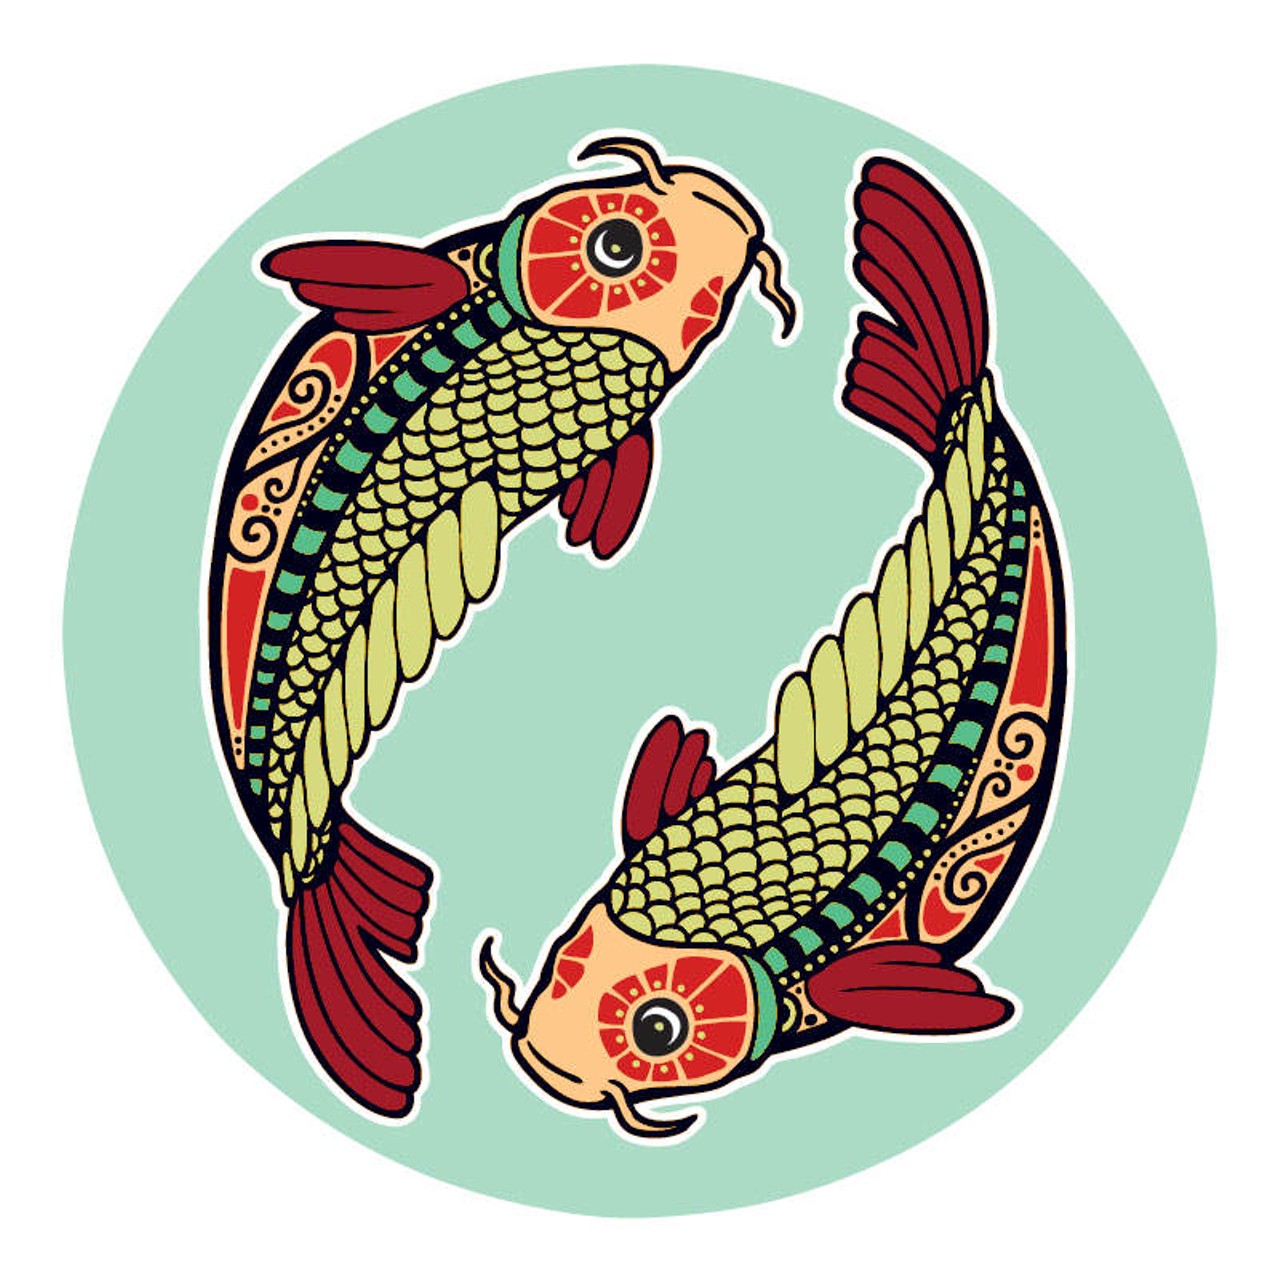 PISCES (Feb. 21-March 20): 
Don&#146;t be put out by people who have too much going on to be there for you. In this situation it&#146;s too much to expect. It would make more sense for you to stop chasing windmills, long enough to see that you have better things to do. Being swept away, trusting people who don&#146;t deserve half of the credit you give to them, and forgetting the fact that your purpose doesn&#146;t include copping out, or falling asleep at the switch, all of these things exist as potential pitfalls right now. It just so happens to be show time. Too much is at stake. The high road is right in front of you.